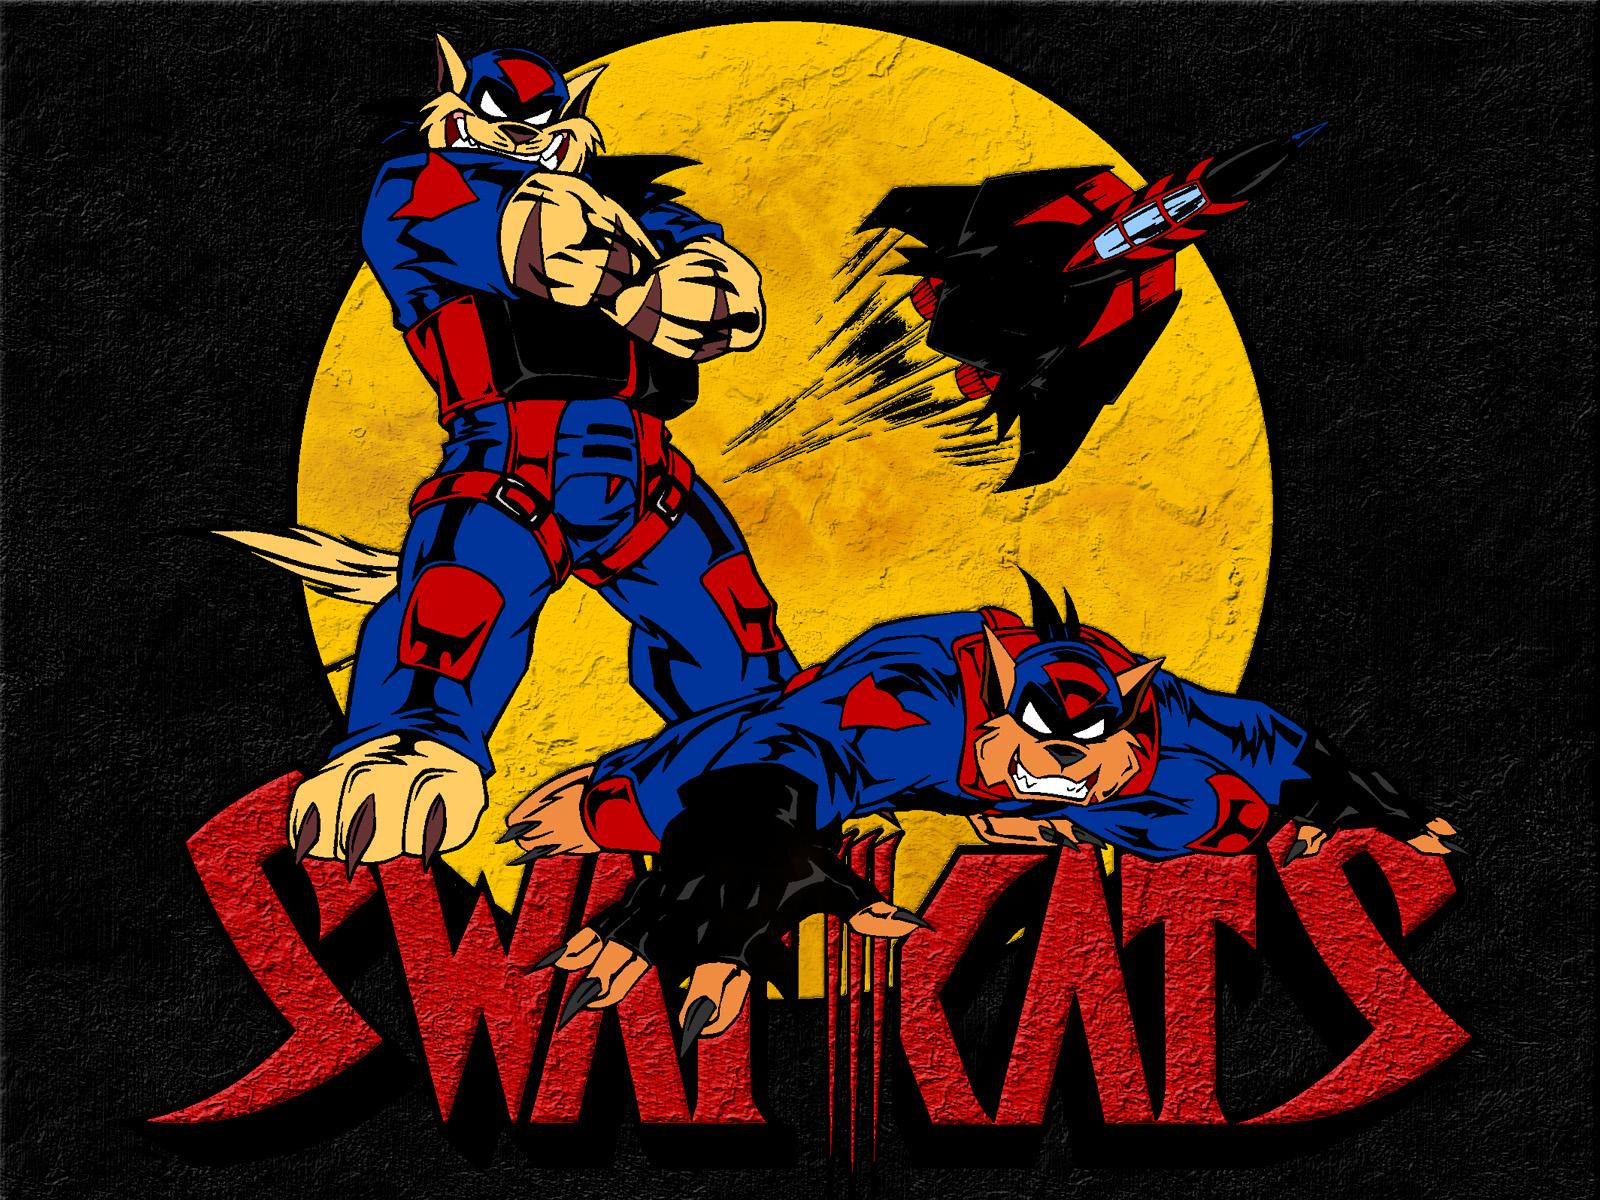 Swat Kats: The Radical Squadron wallpapers for desktop, download free Swat  Kats: The Radical Squadron pictures and backgrounds for PC 